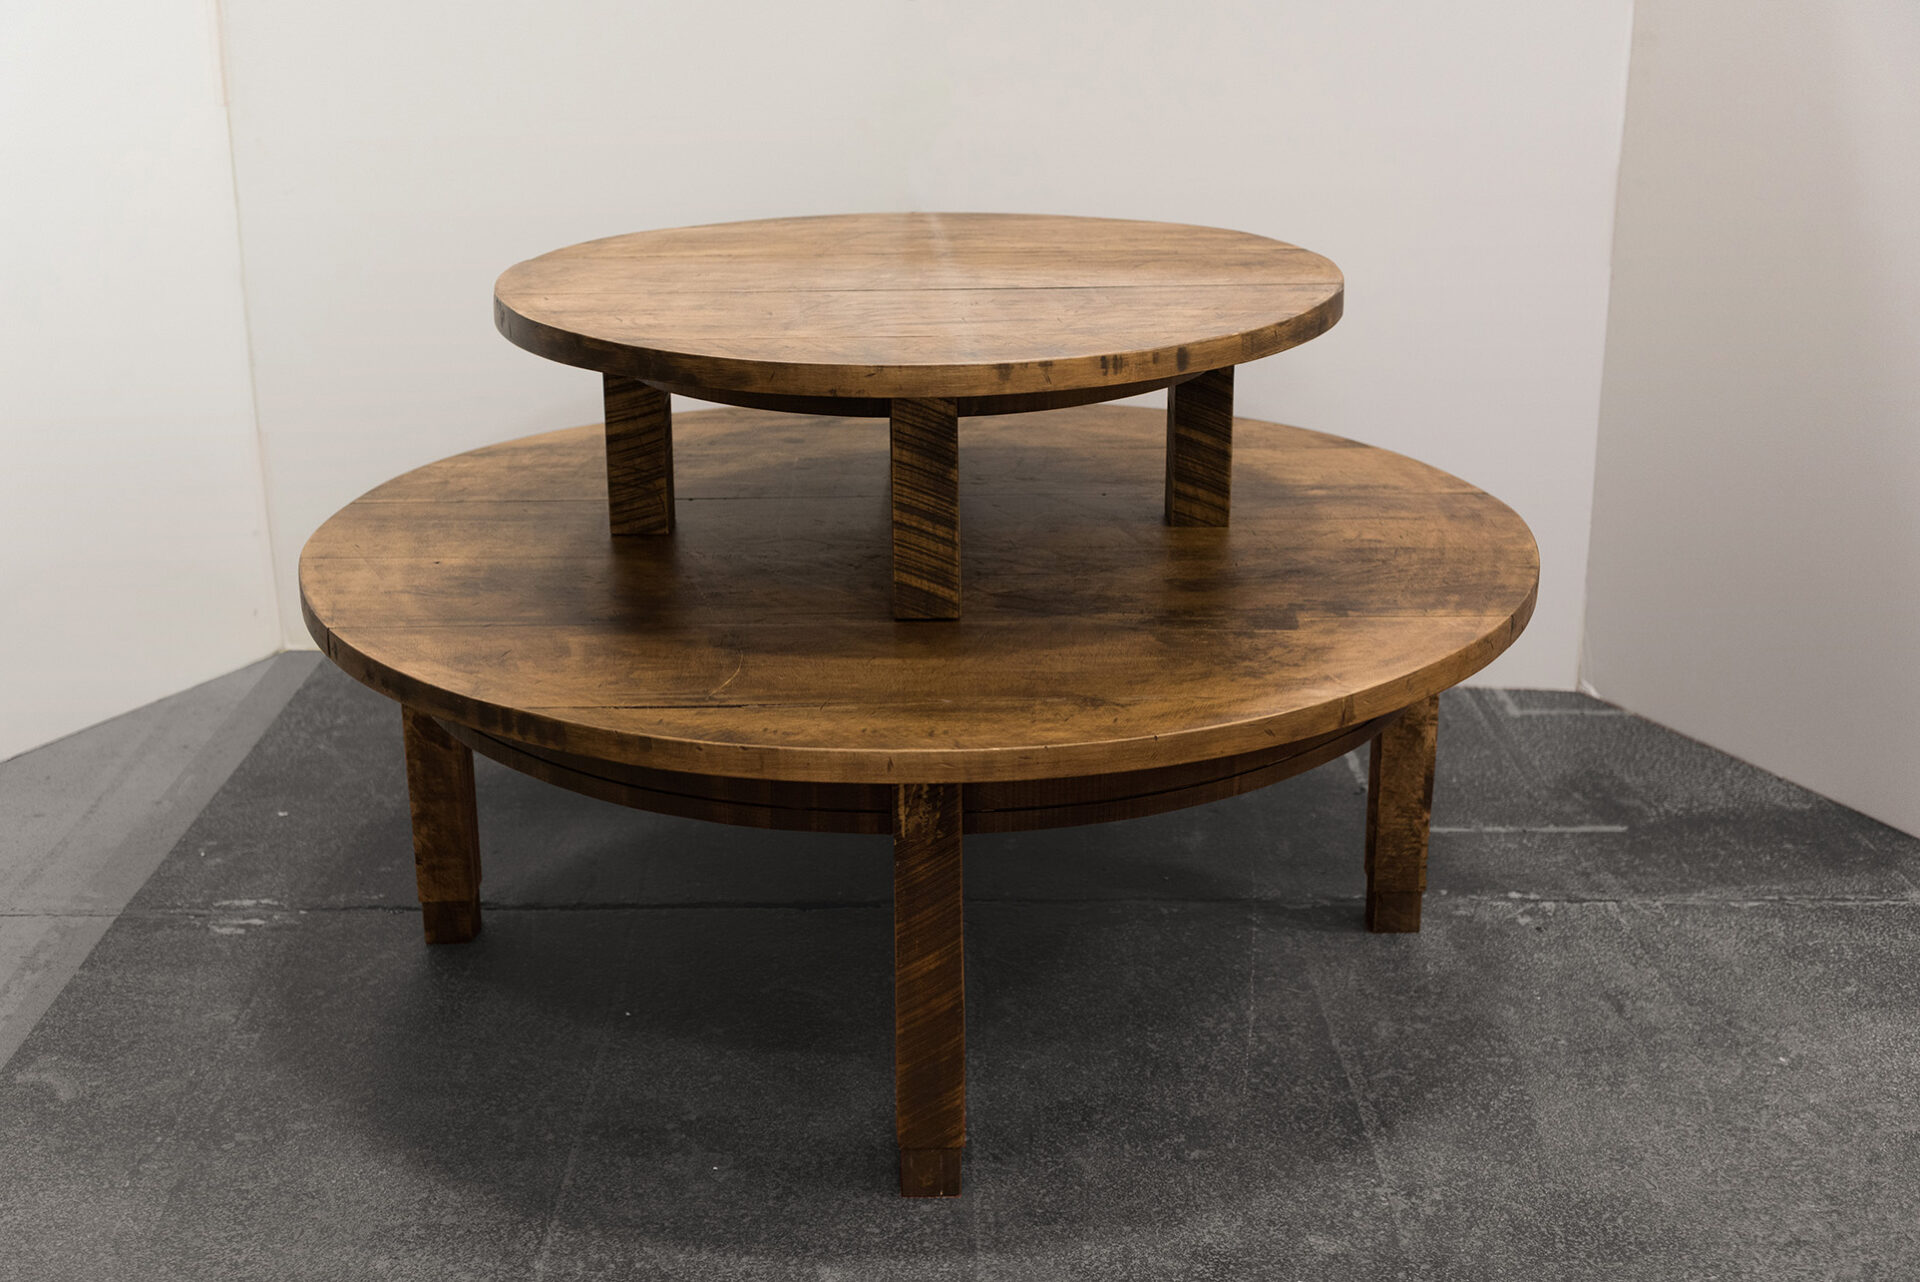 ROUND WOOD NESTED TABLE WITH SOLID TEXTURED EDGES